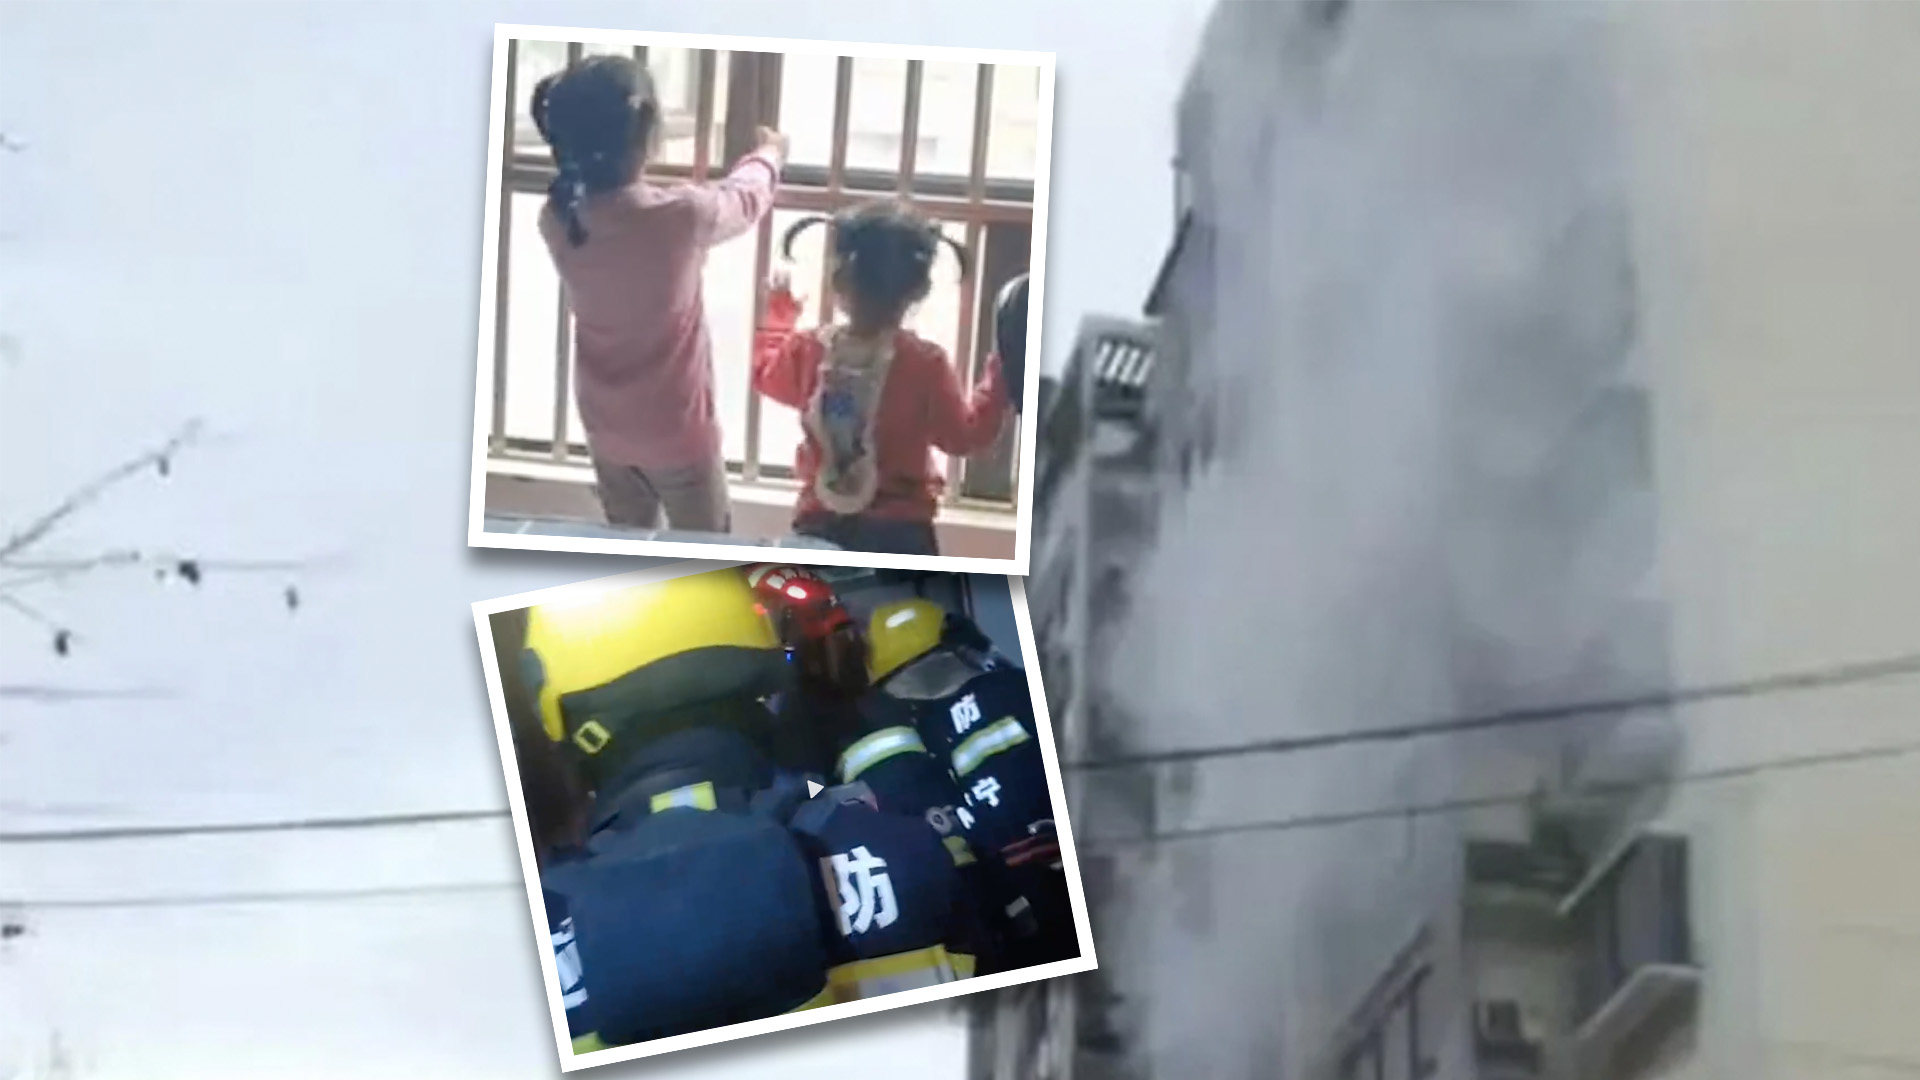 A quick thinking 4-year-old who kept her nerve when a fire started while she and her baby sister were home alone impresses mainland China after emergency call audio is released. SCMP composite